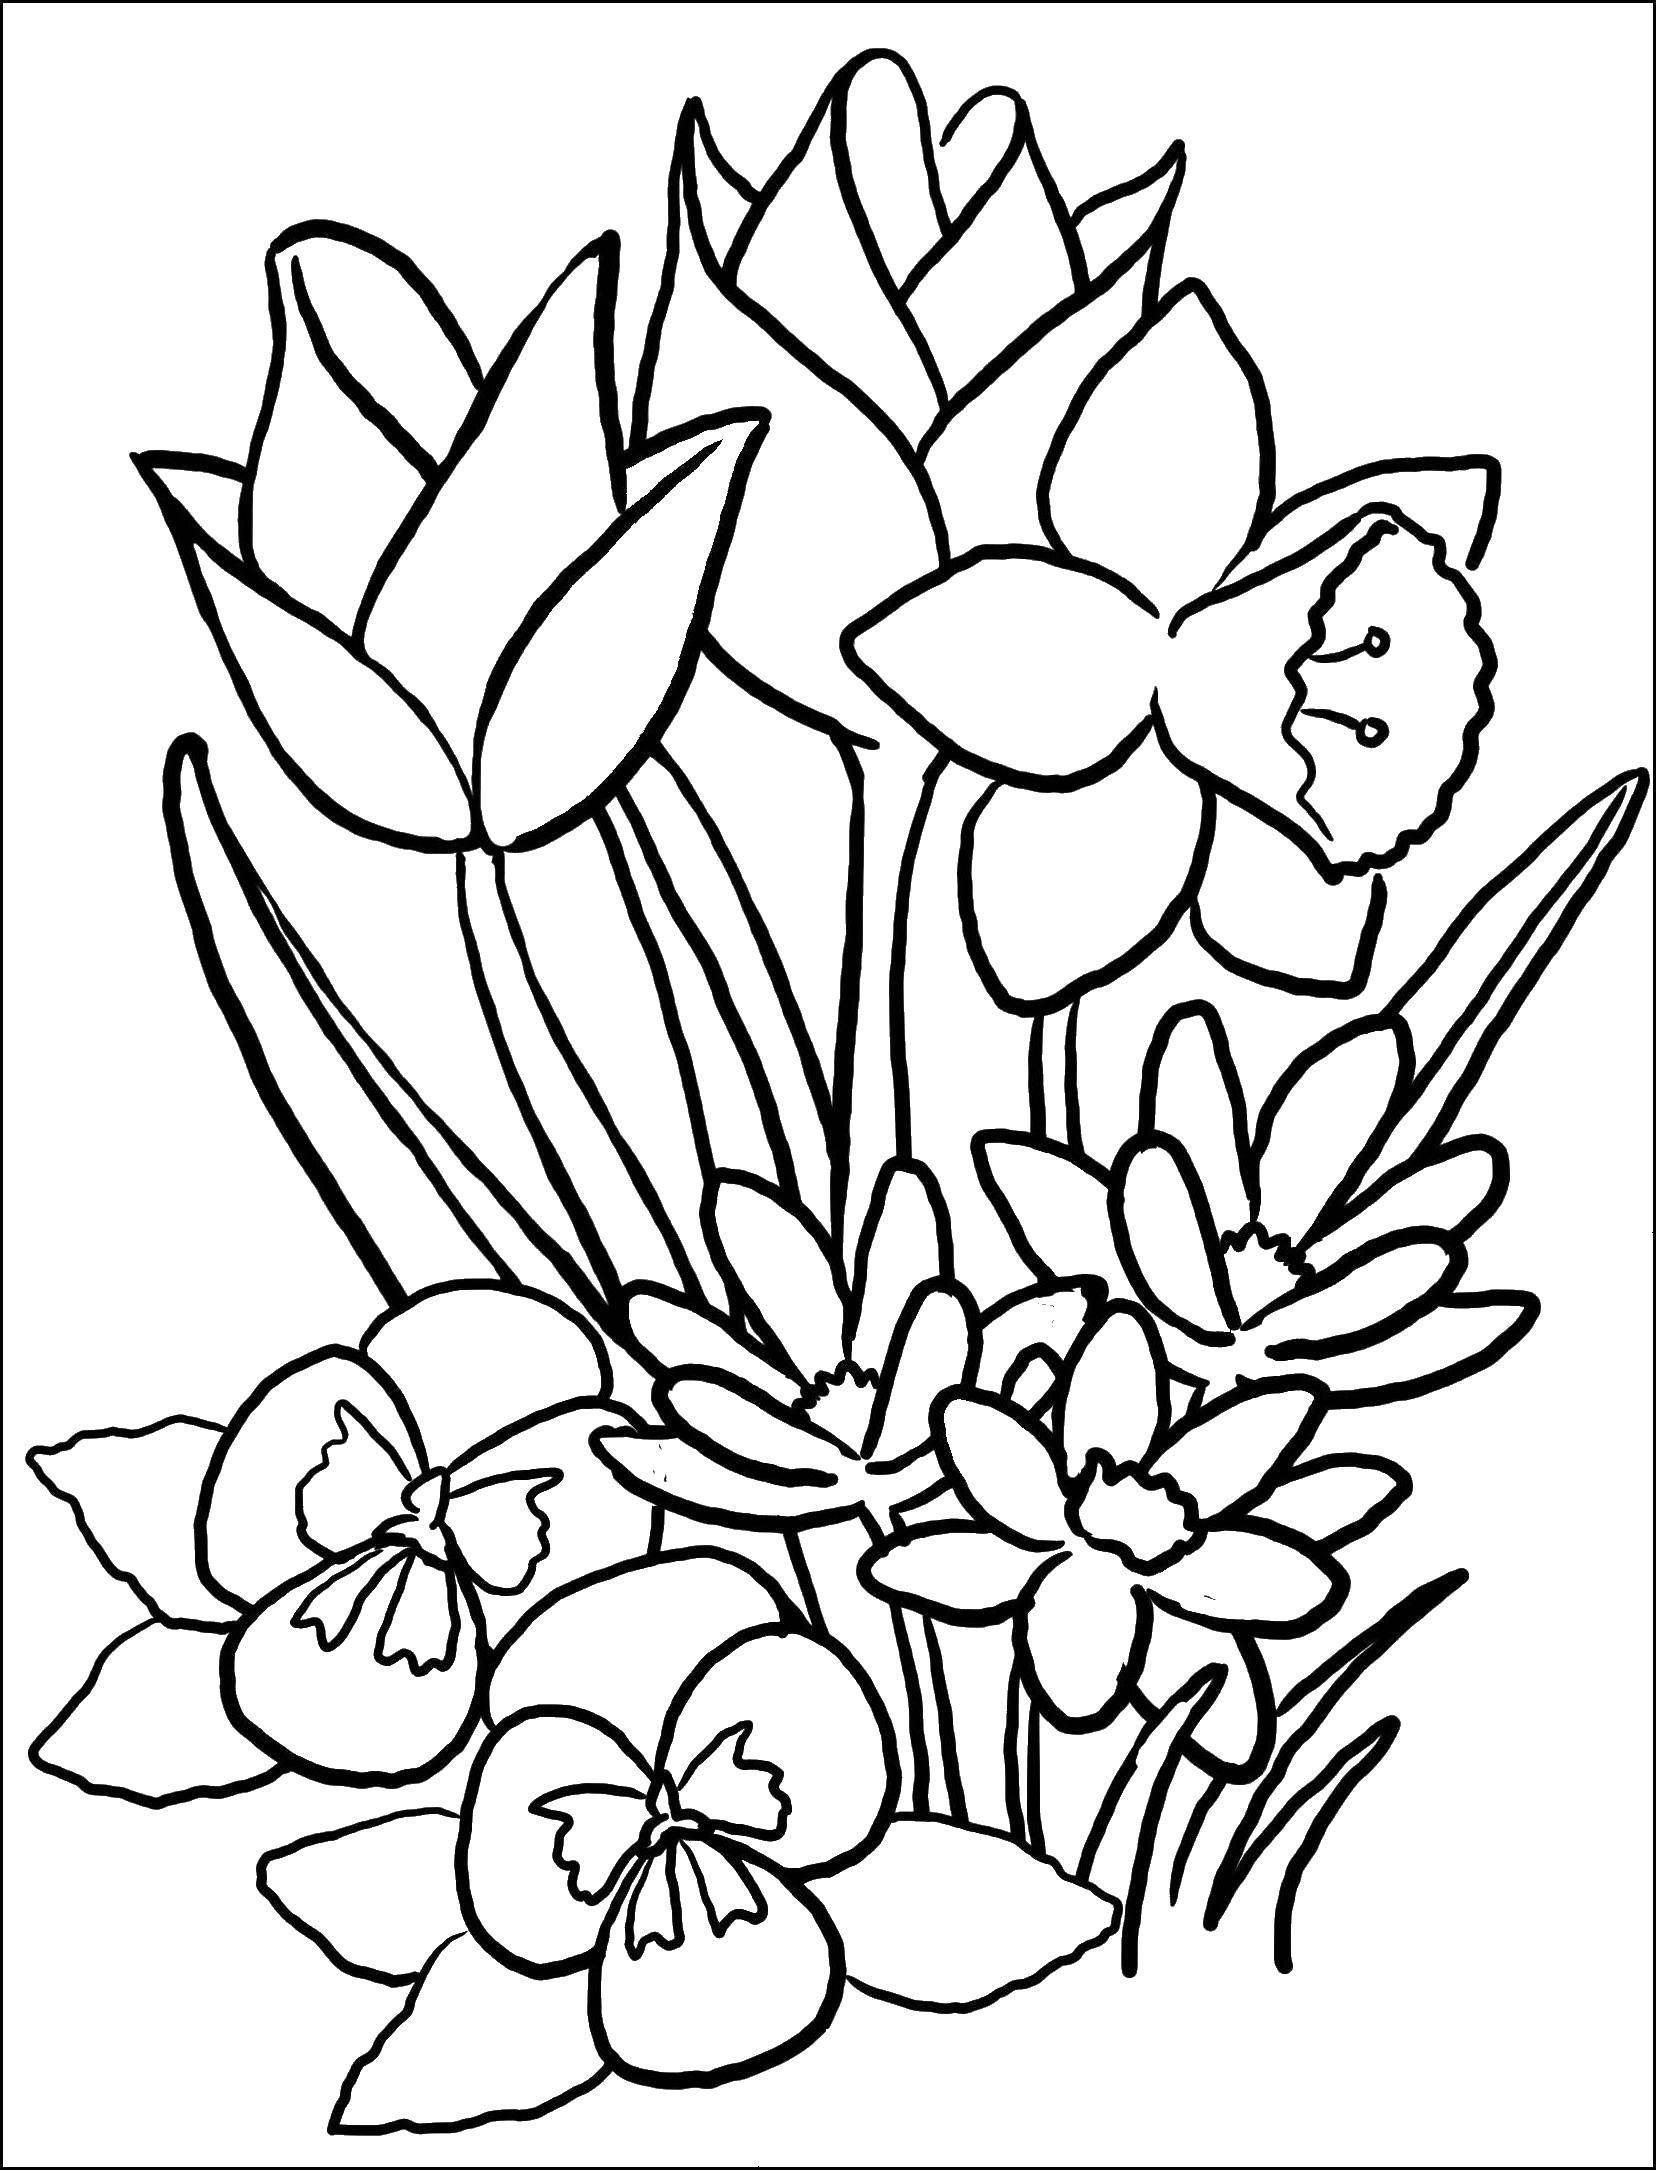 Coloring Blooming flowers. Category spring. Tags:  Spring, flowers, warmth.